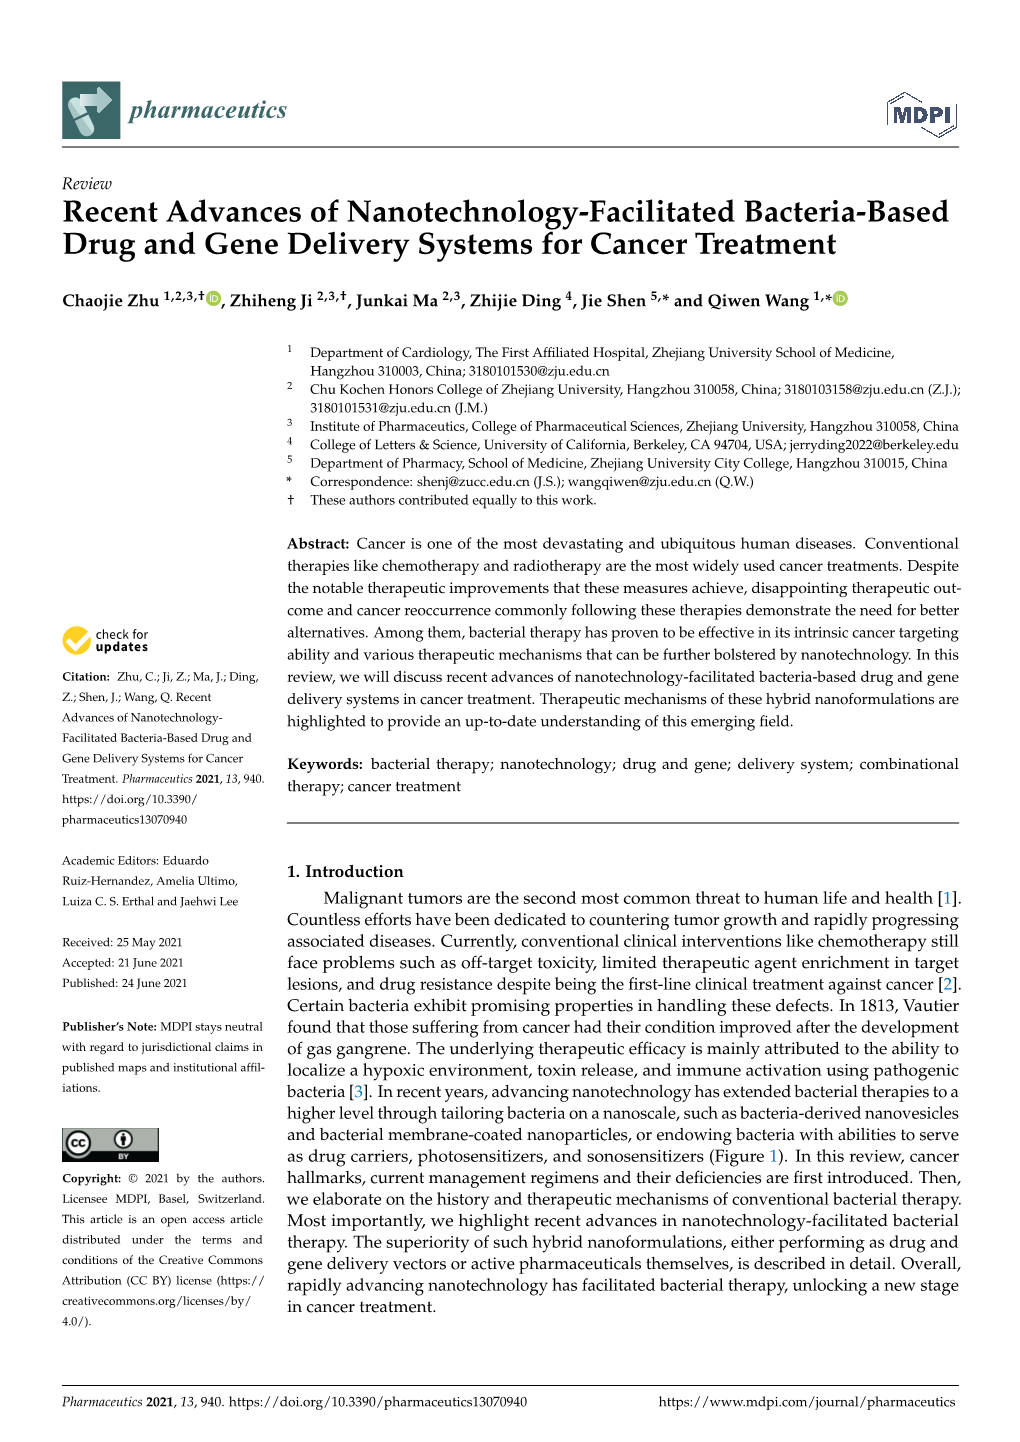 Recent Advances of Nanotechnology-Facilitated Bacteria-Based Drug and Gene Delivery Systems for Cancer Treatment